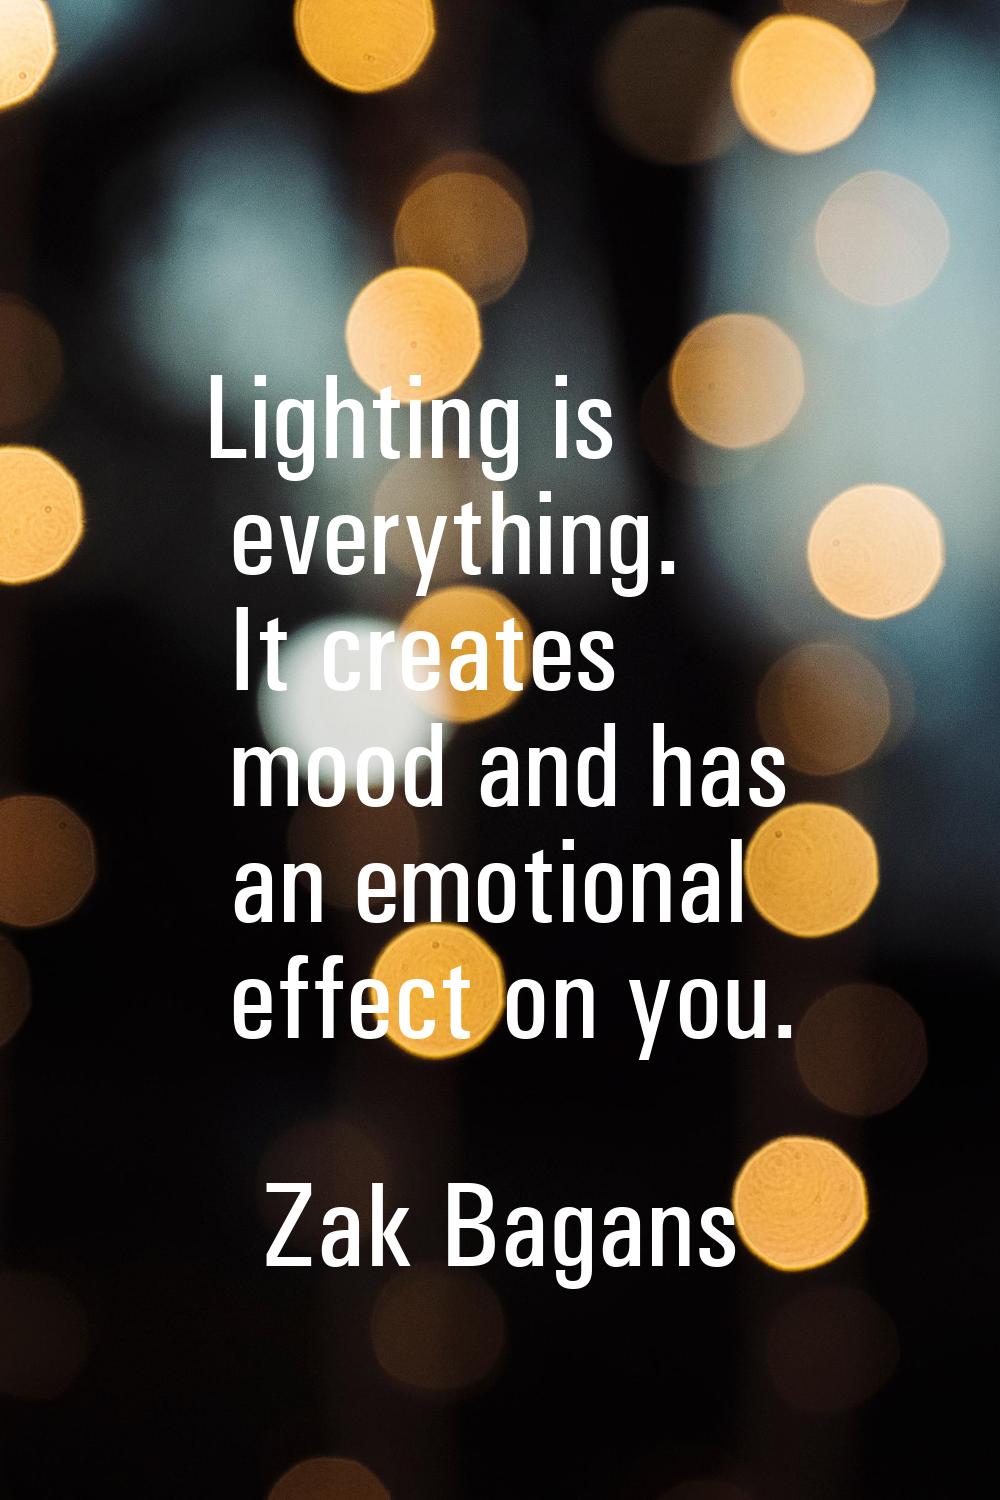 Lighting is everything. It creates mood and has an emotional effect on you.